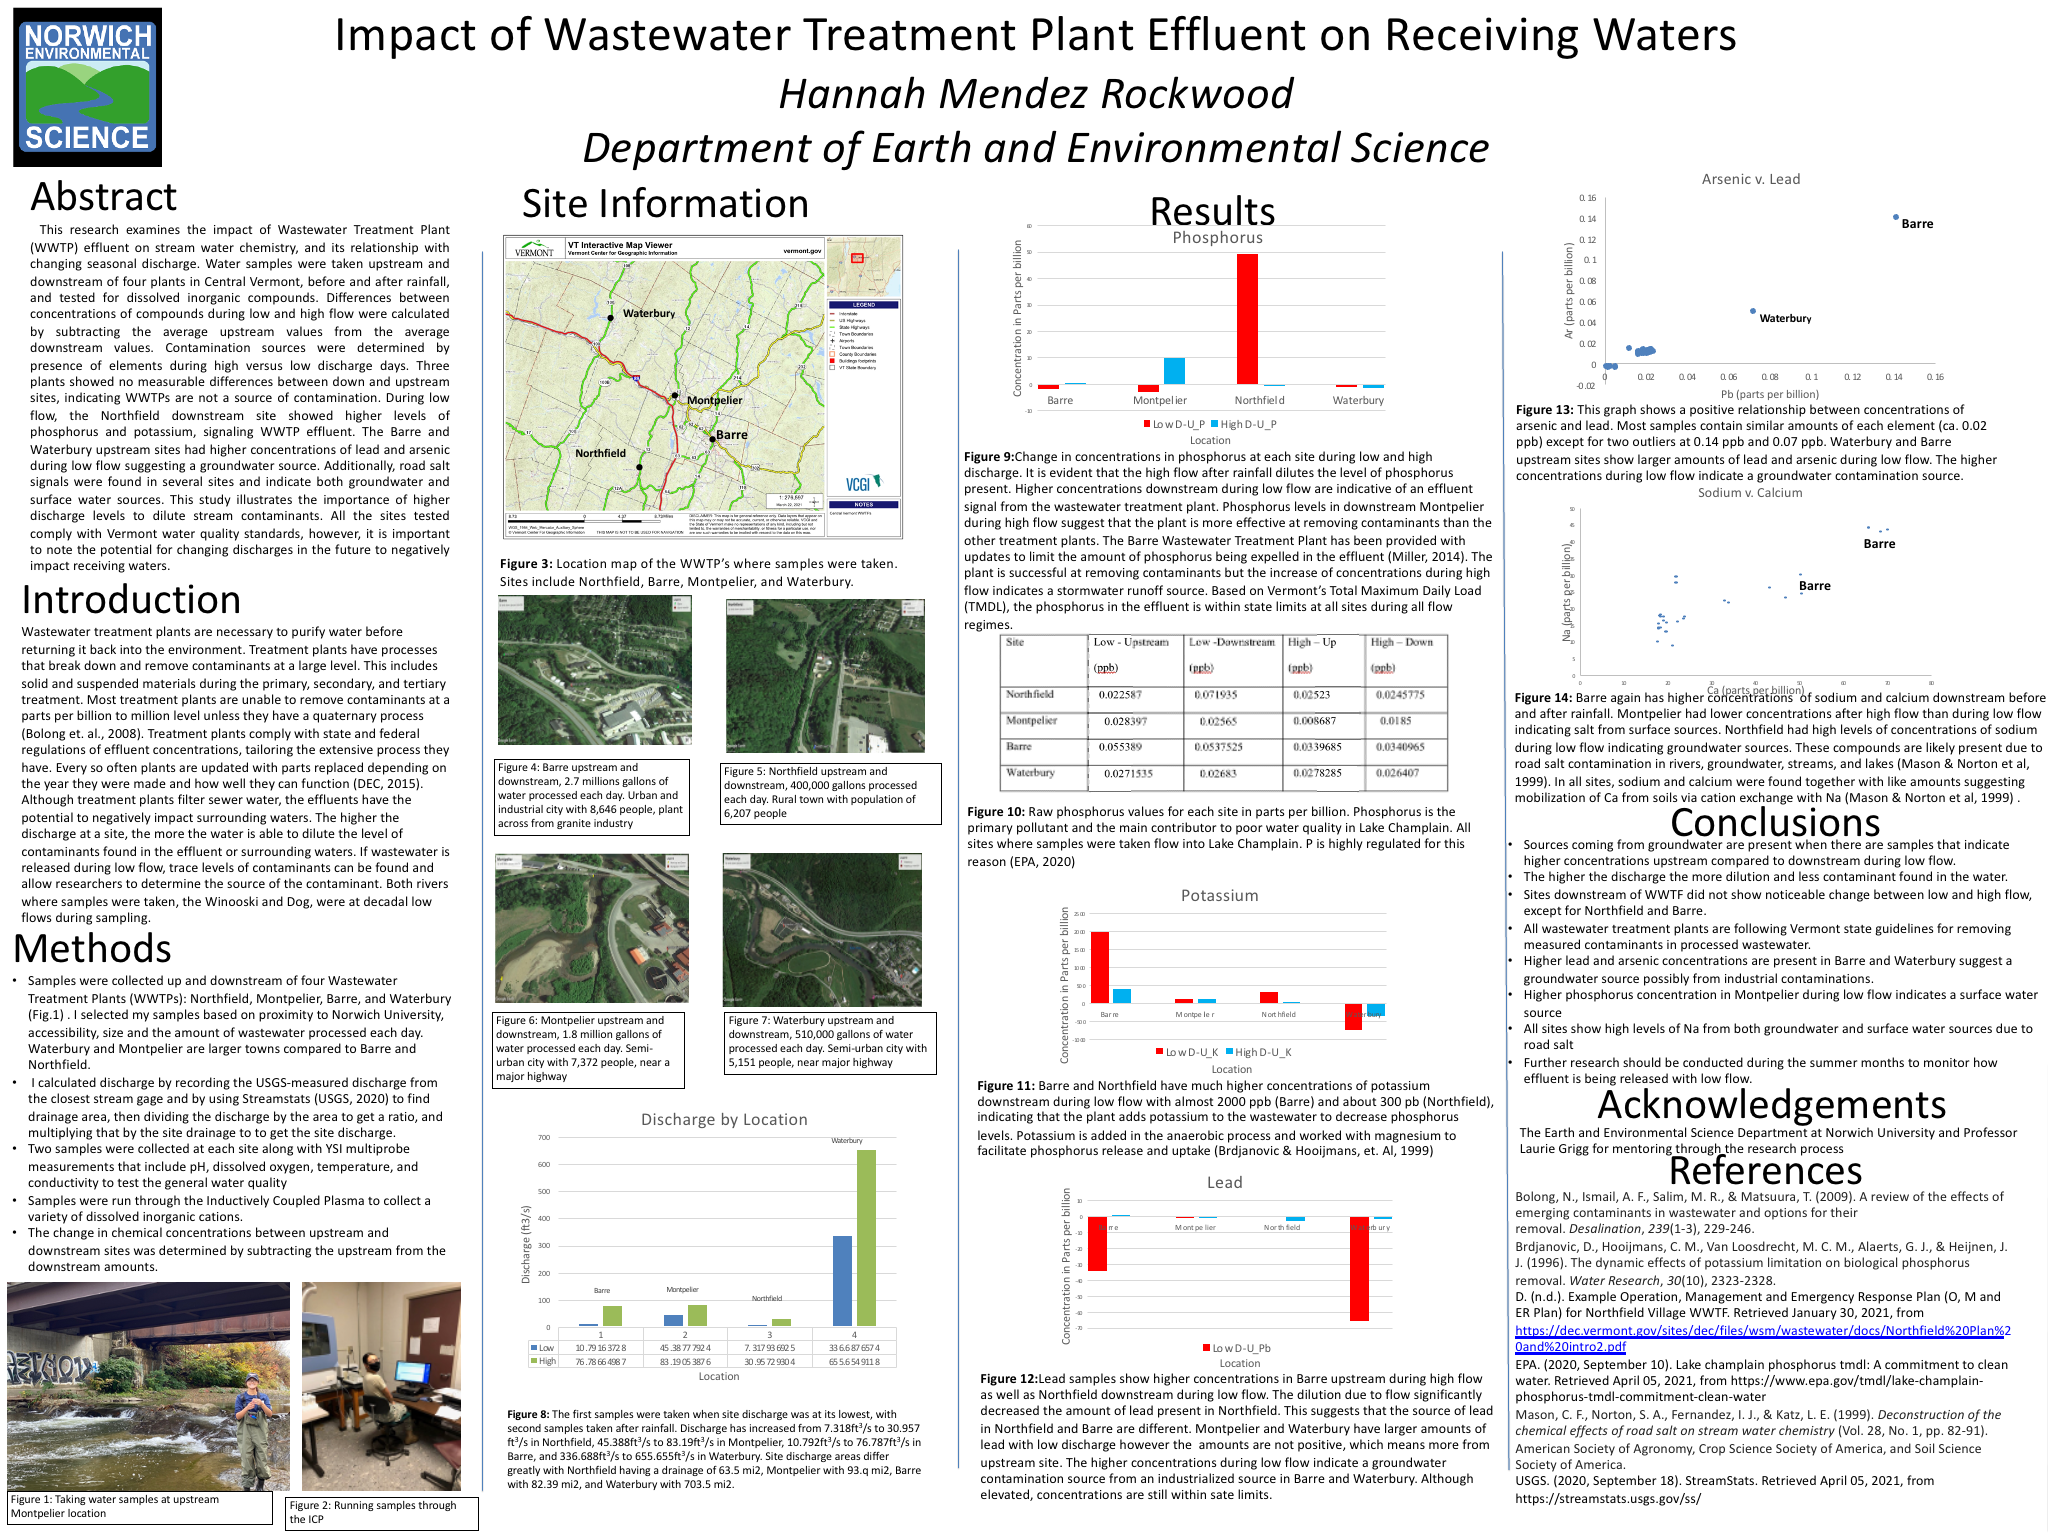 Showcase Image for Impact of Wastewater Treatment Plant Effluent on Receiving Waters